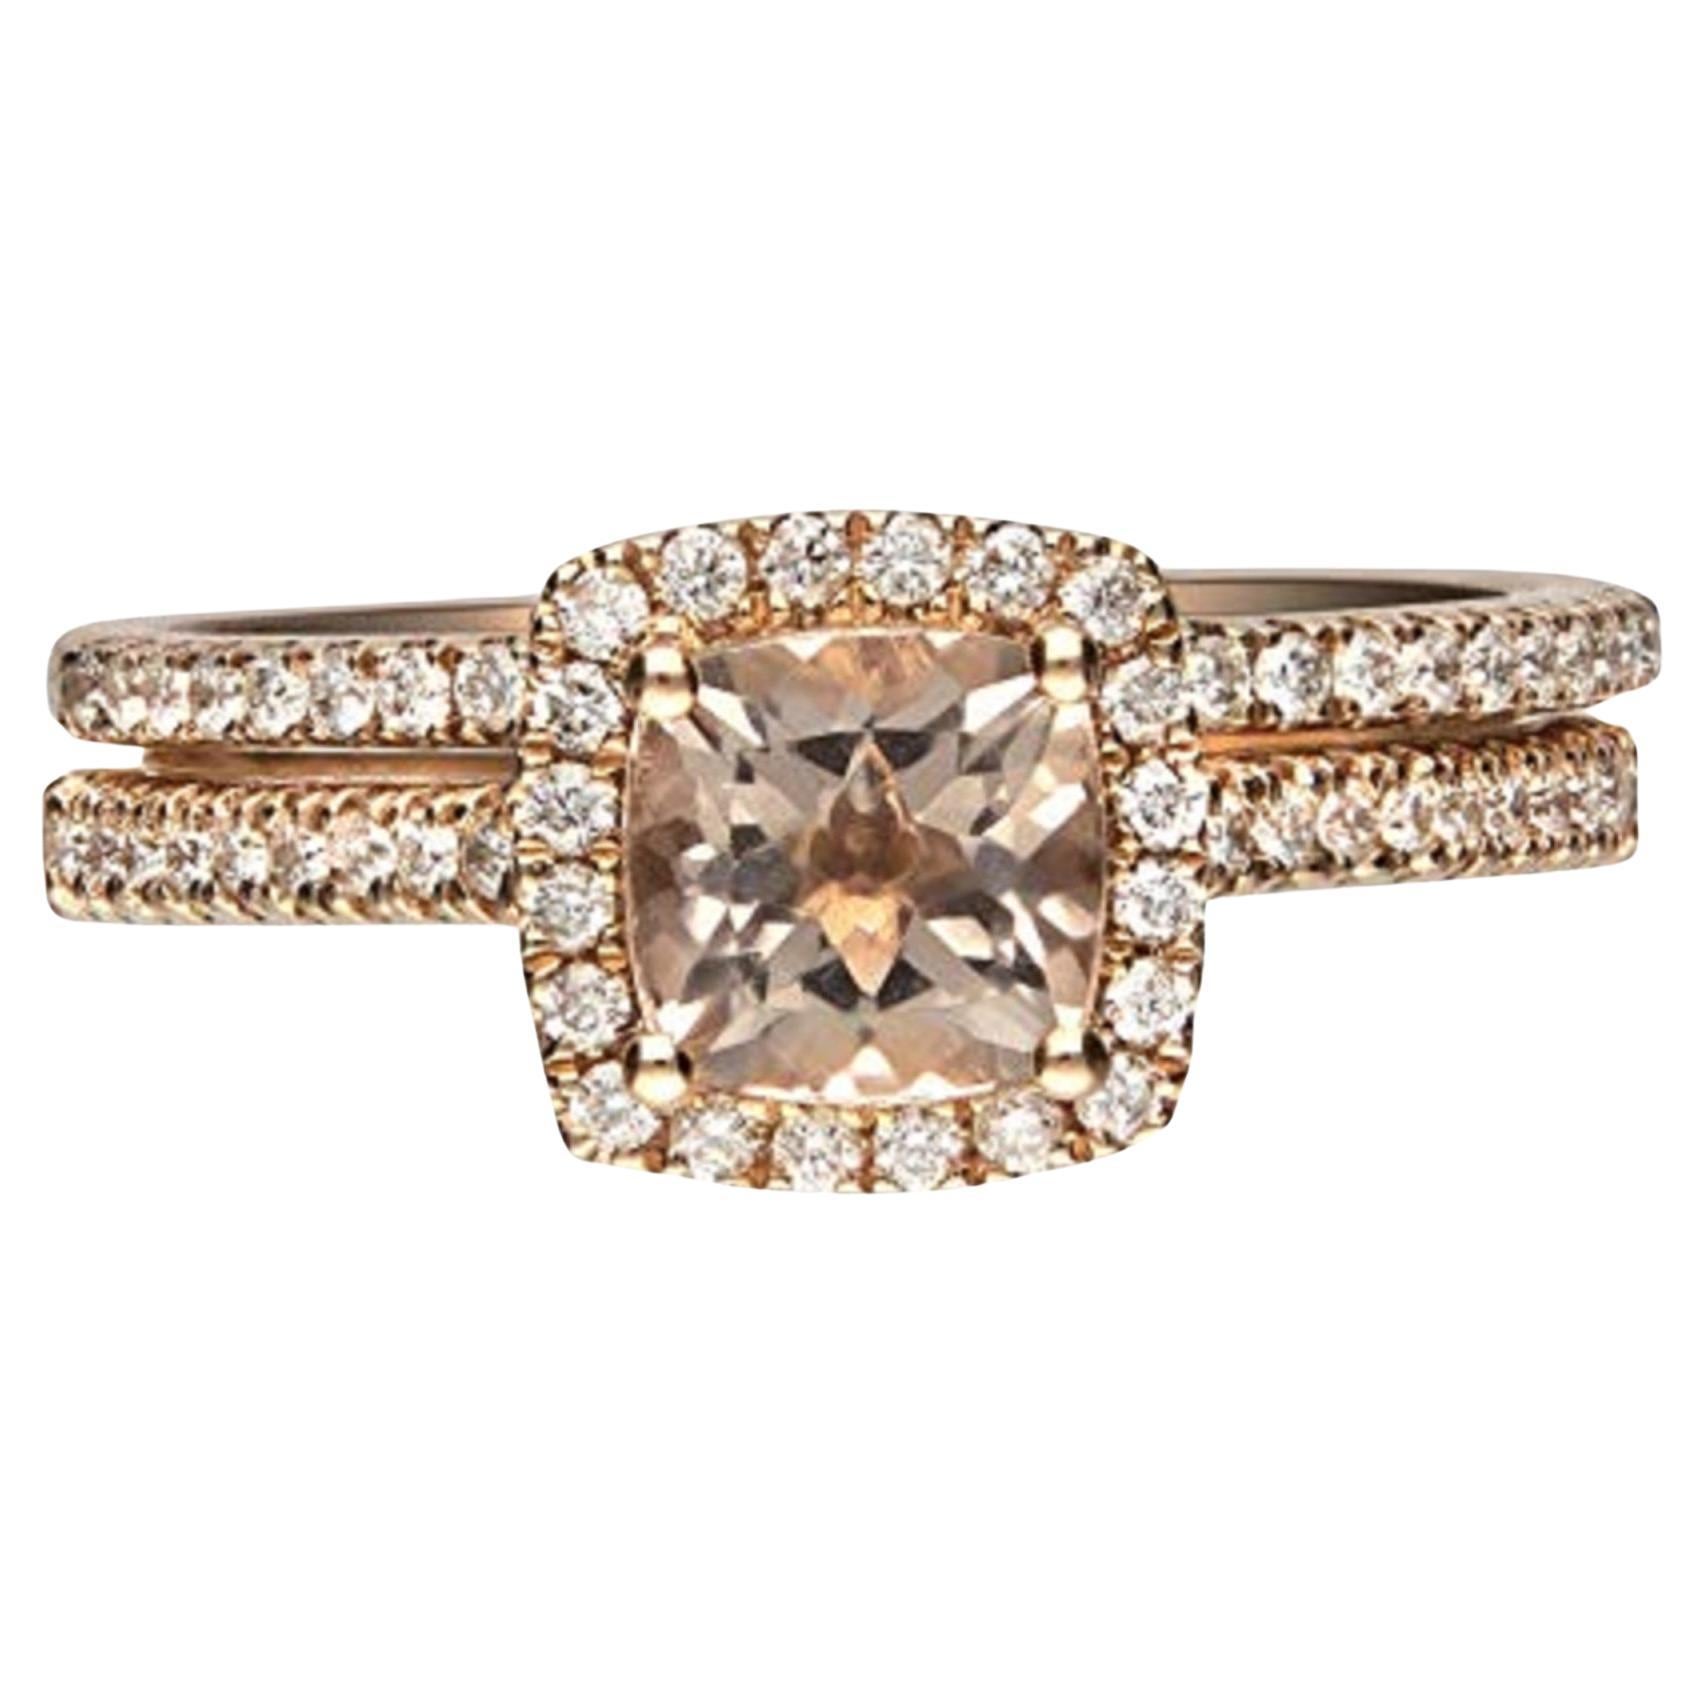 Gin & Grace 14K Rose Gold Genuine Morganite Ring with Diamonds for women For Sale